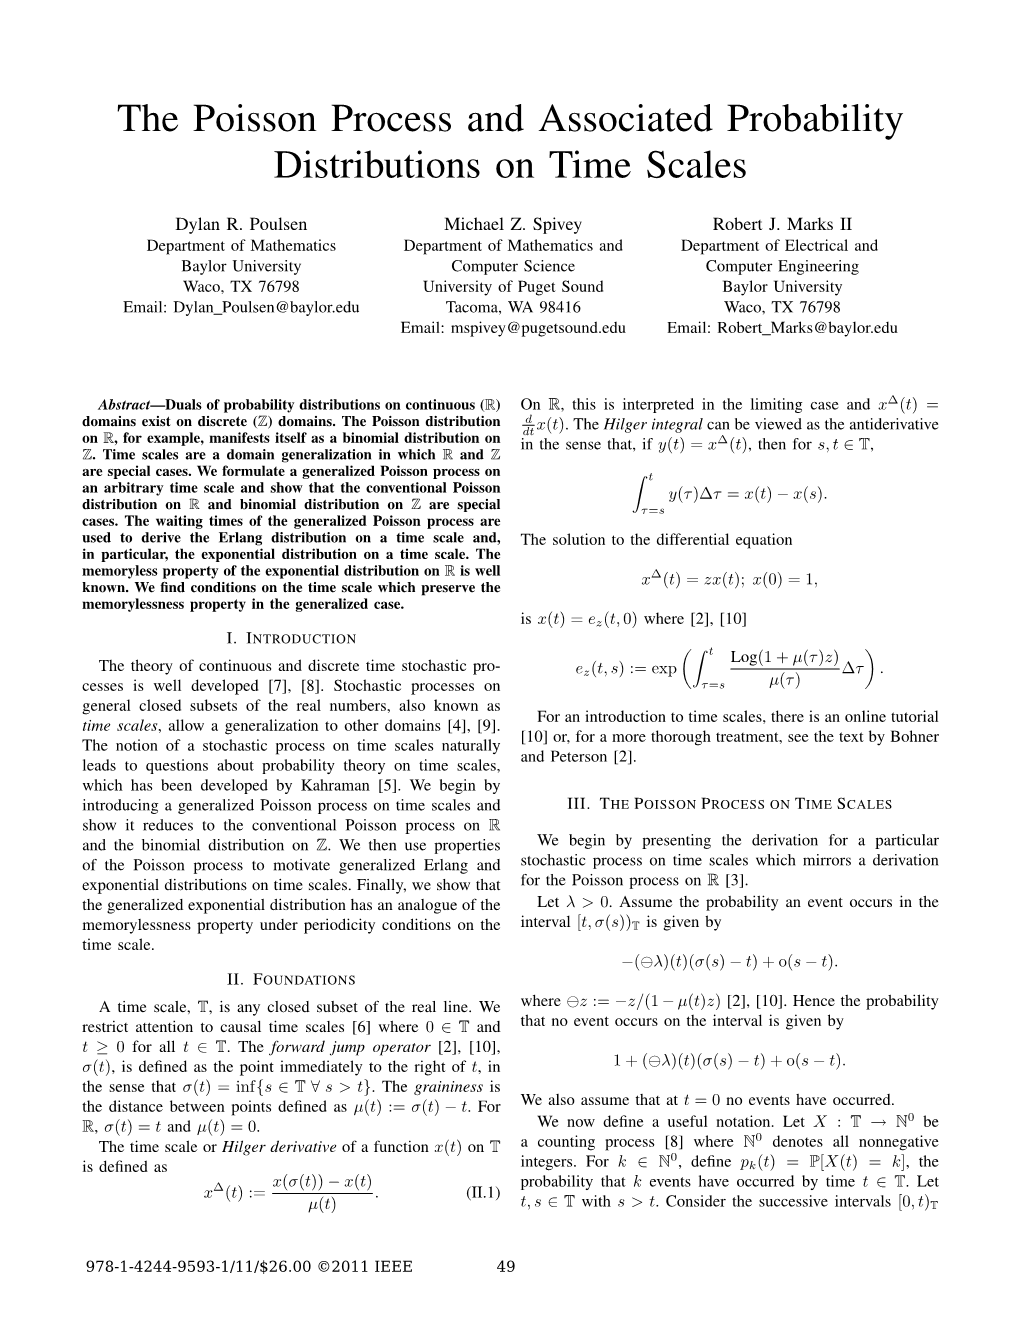 The Poisson Process and Associated Probability Distributions on Time Scales